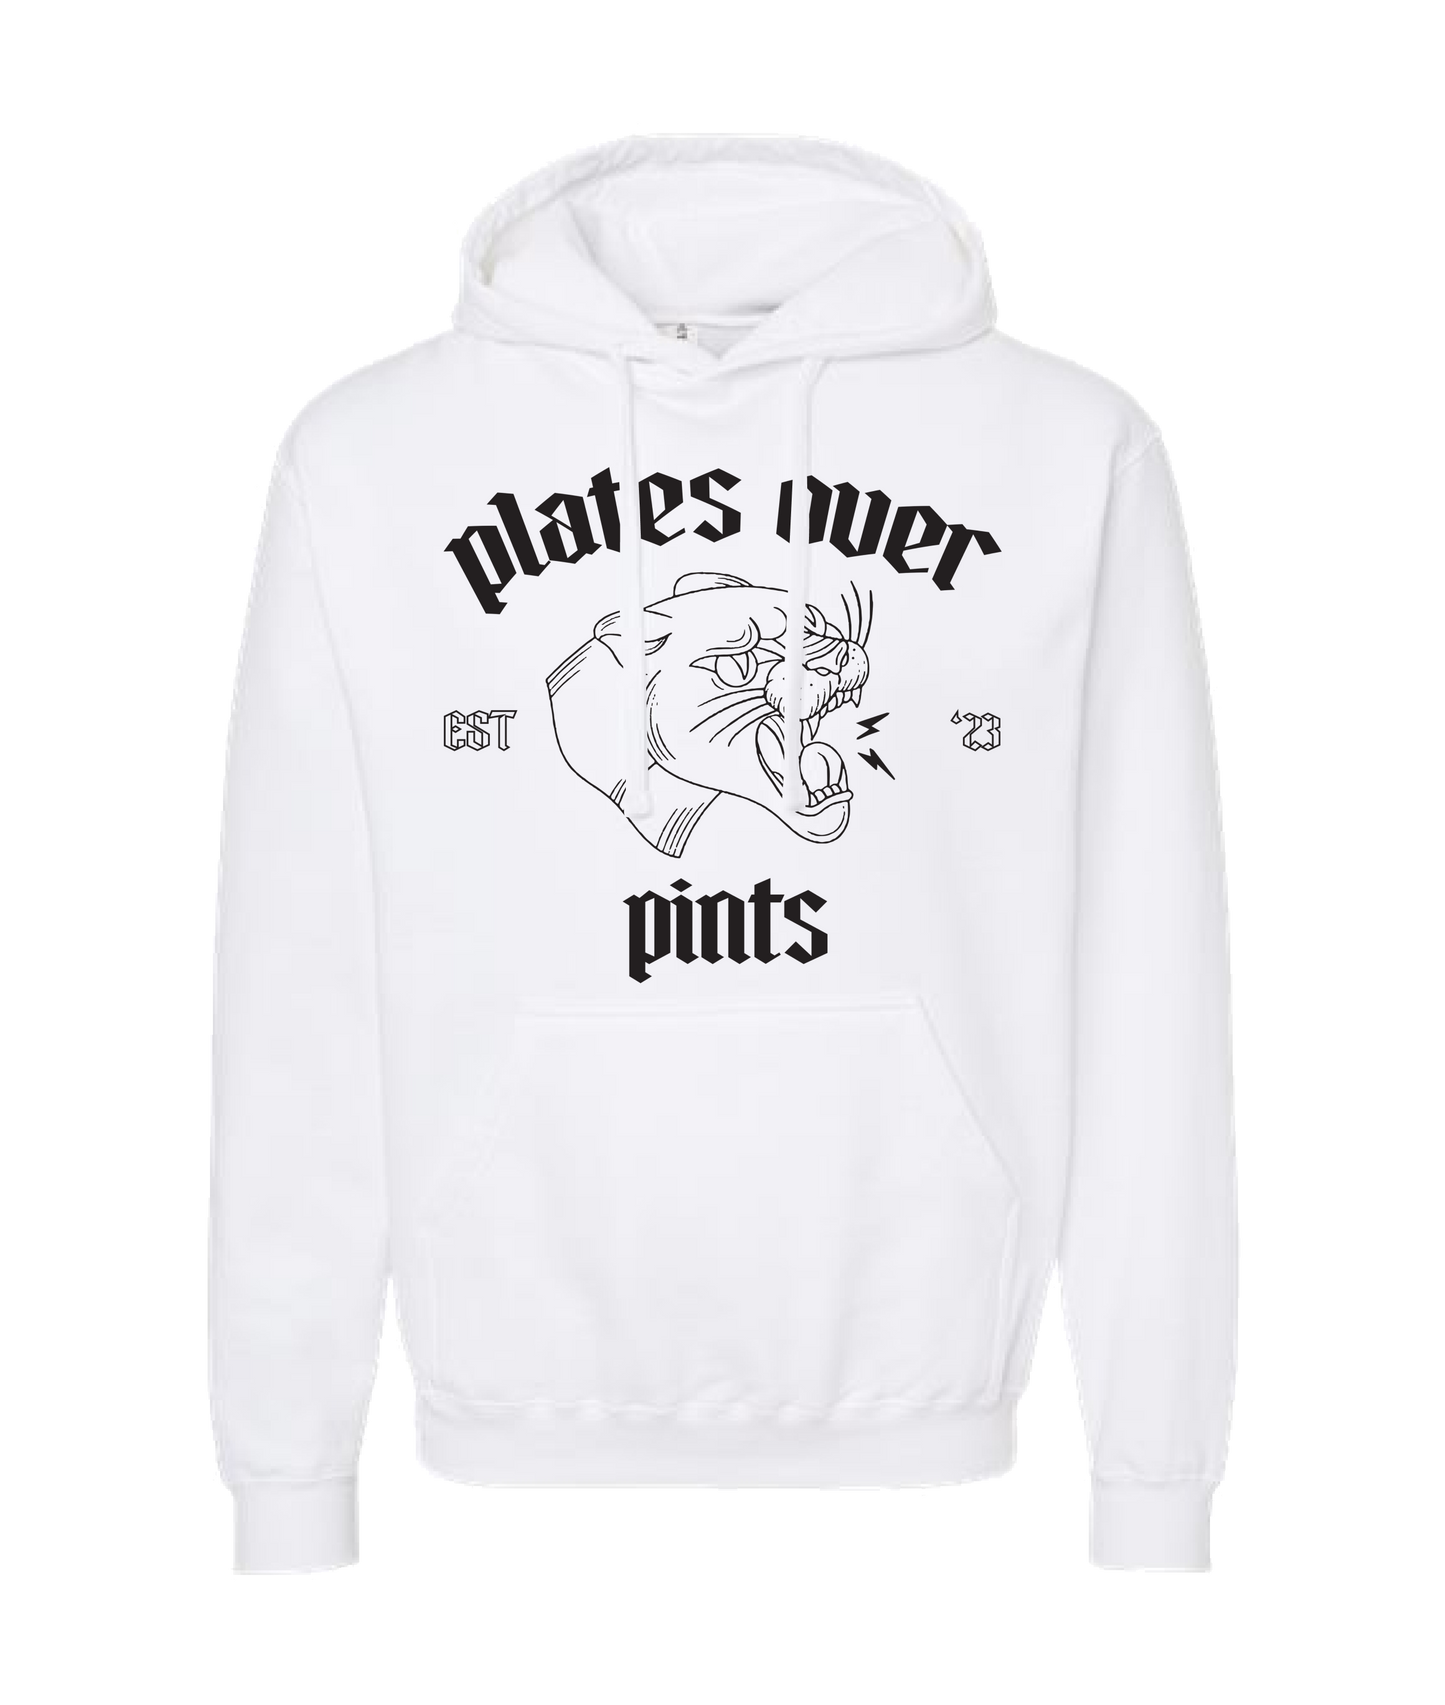 Plates Over Pints - LOGO 1 - White Hoodie